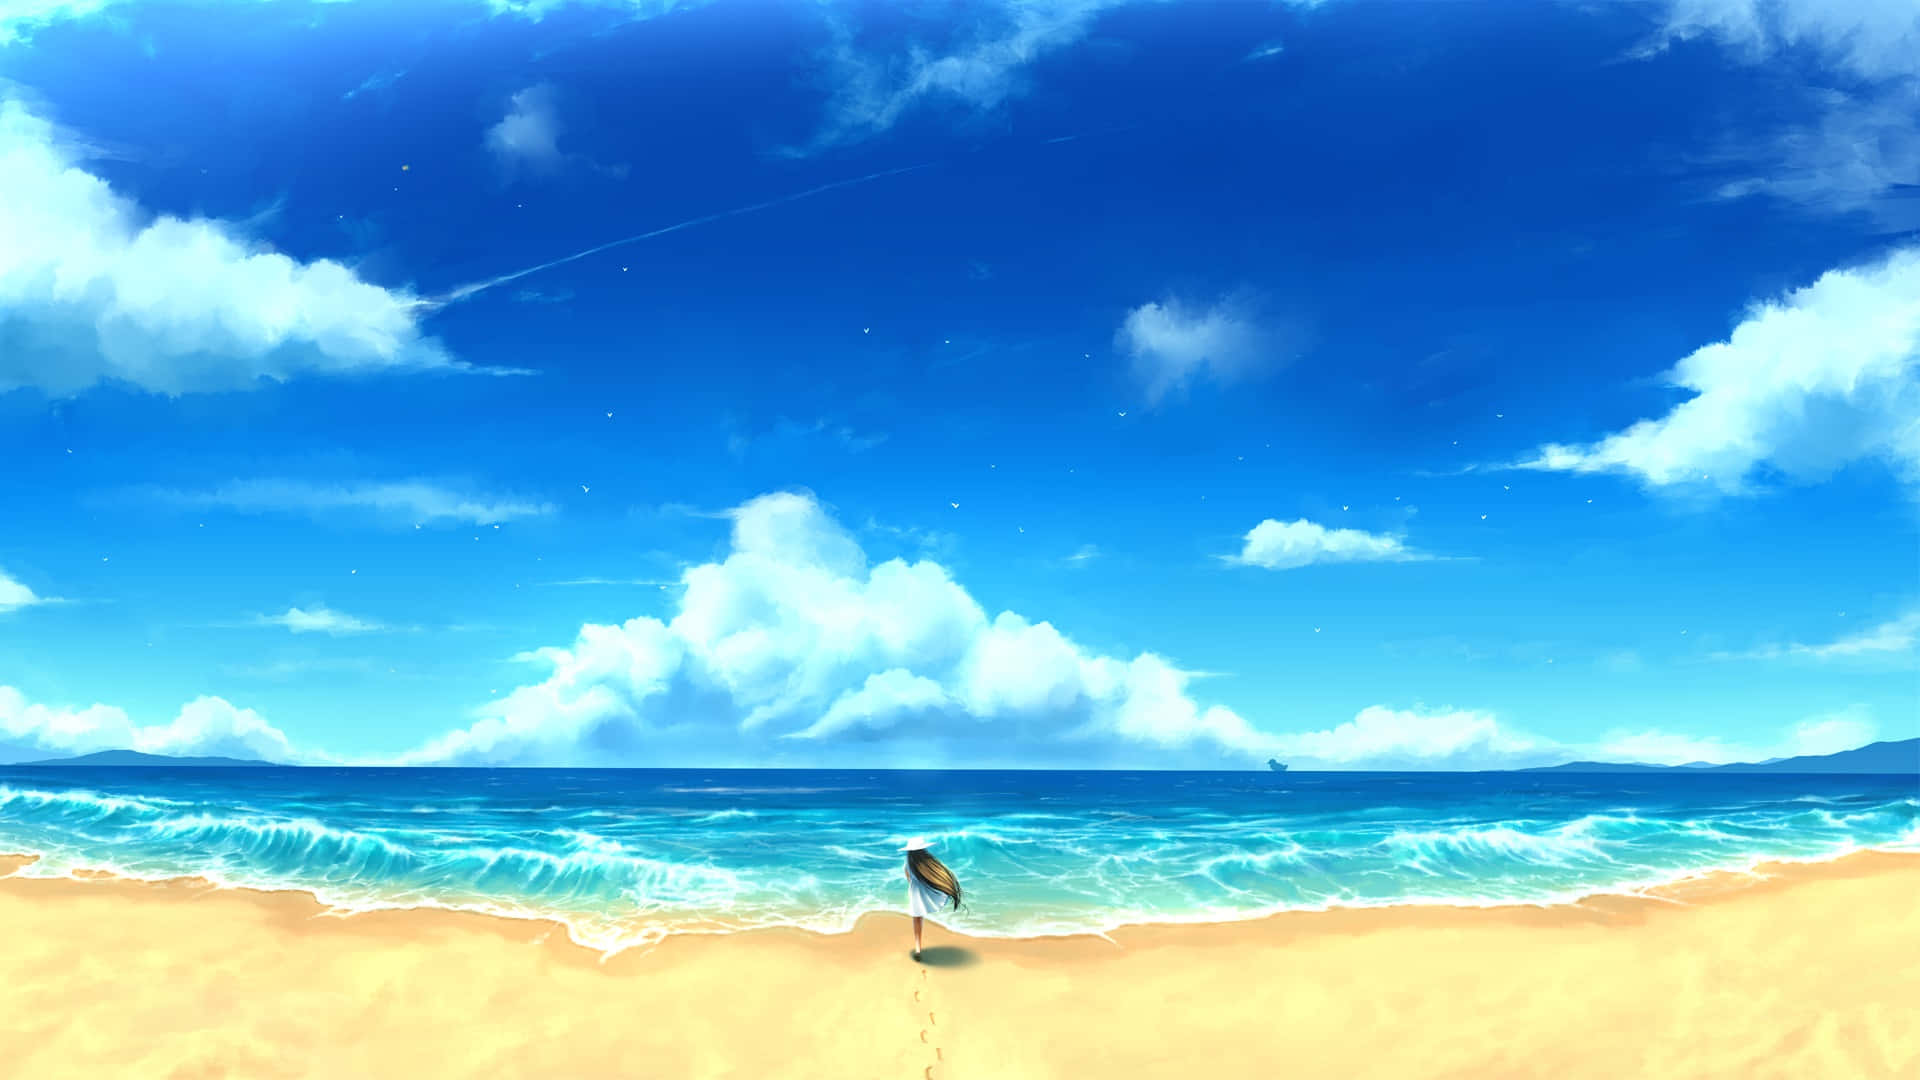 Download Anime Beach Background | Wallpapers.com